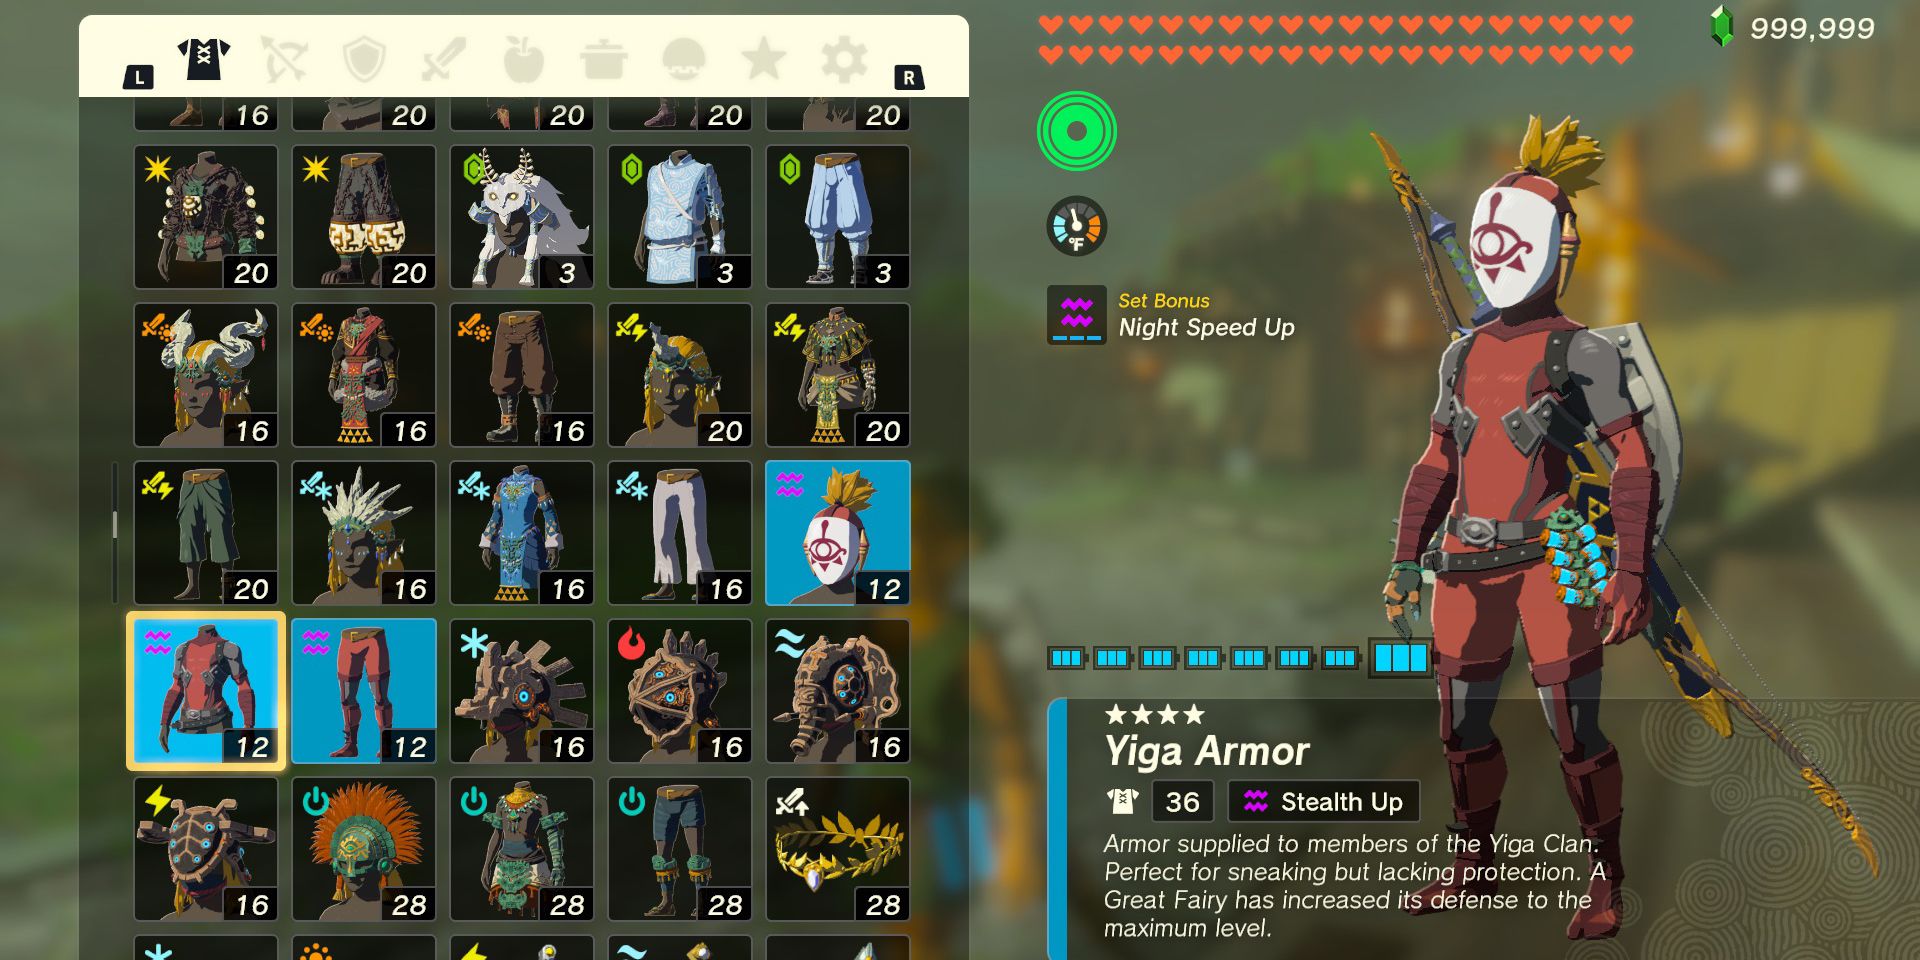 The Yiga armor set in The Legend of Zelda: Tears of the Kingdom